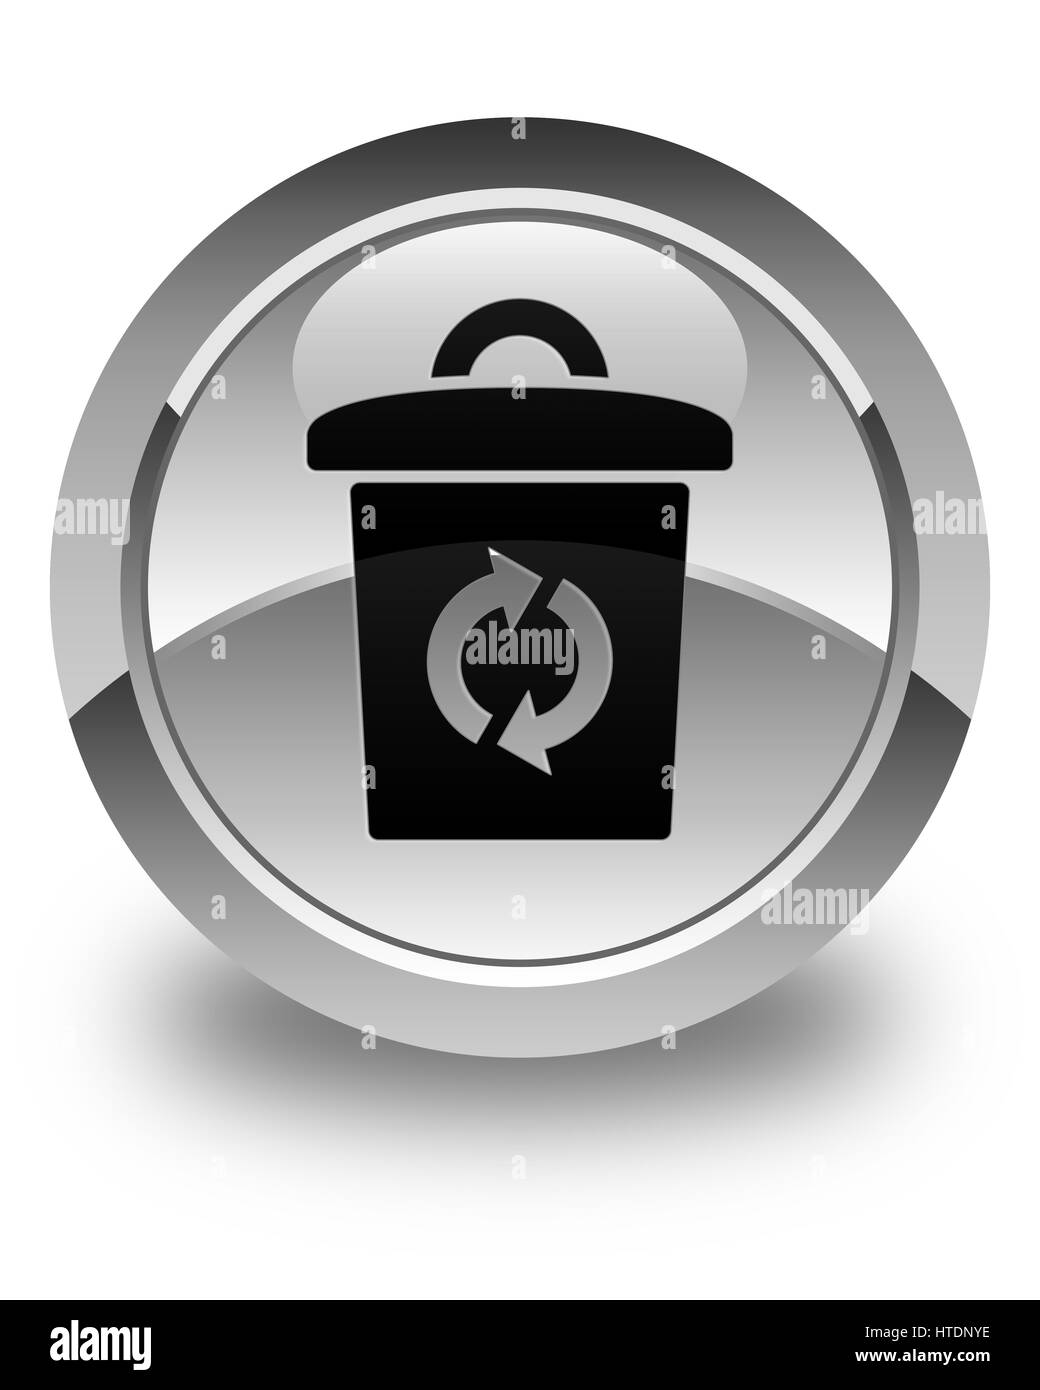 Trash icon isolated on glossy white round button abstract illustration Stock Photo